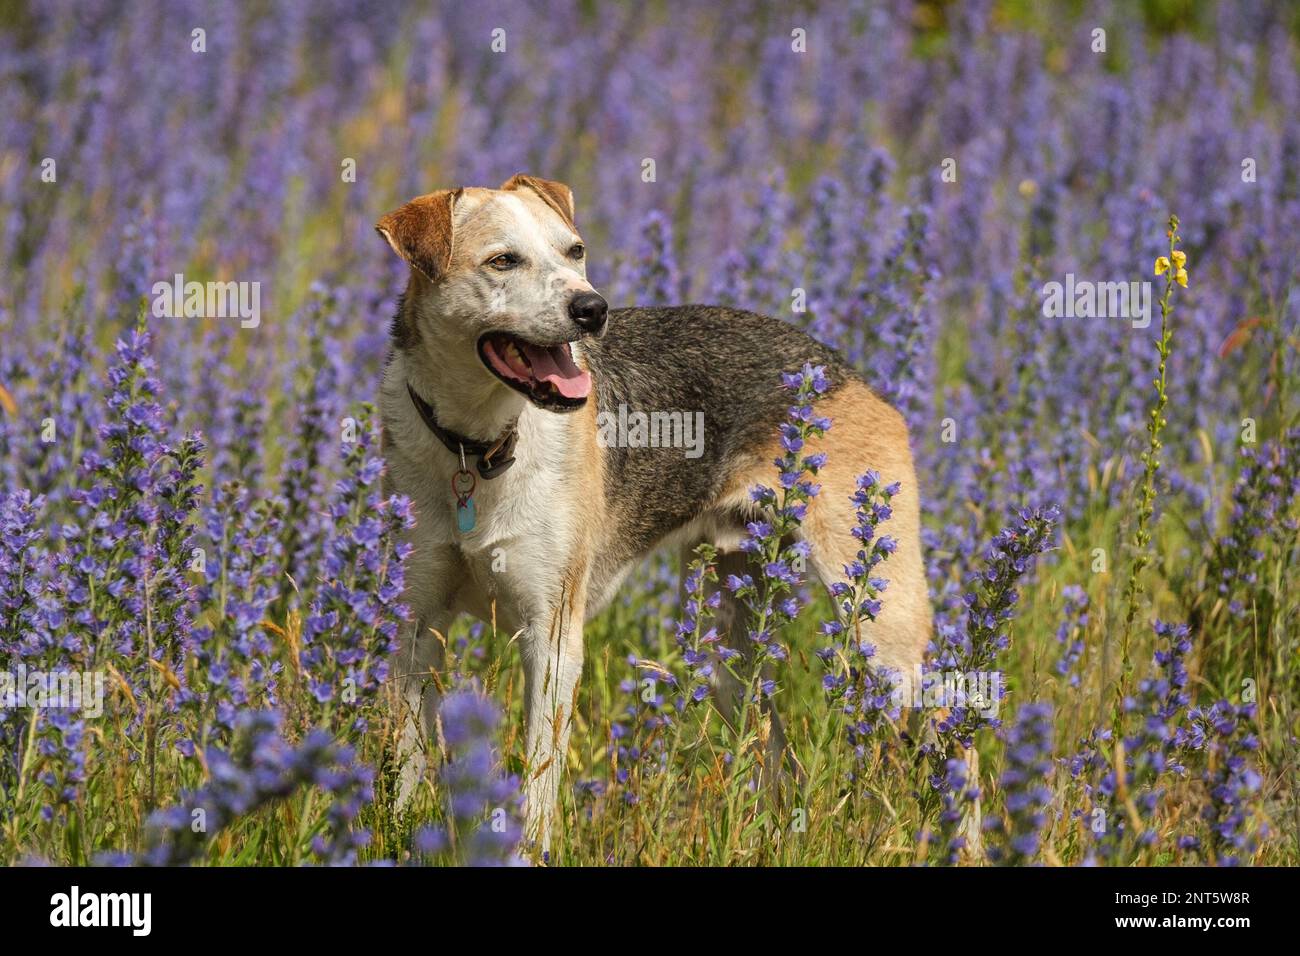 A New Zealand Huntaway sheep dog stands in a wild flower meadow Stock Photo